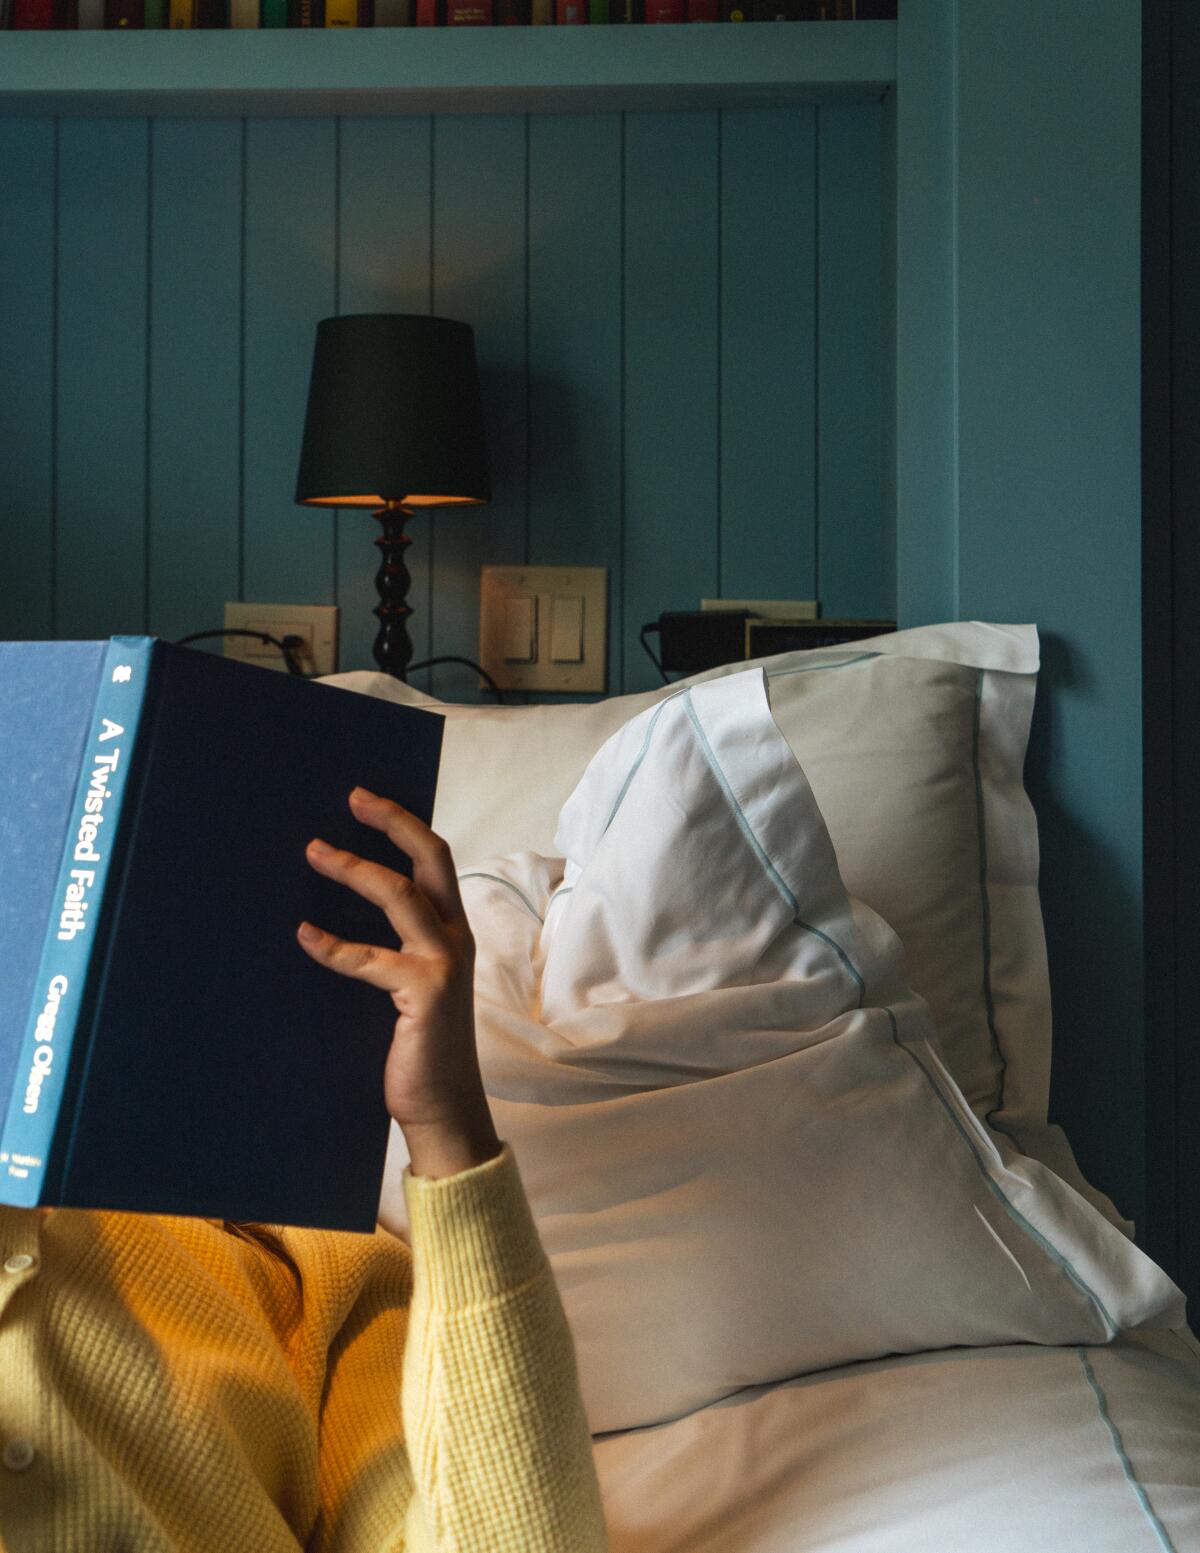 A person looks at a book in bed.